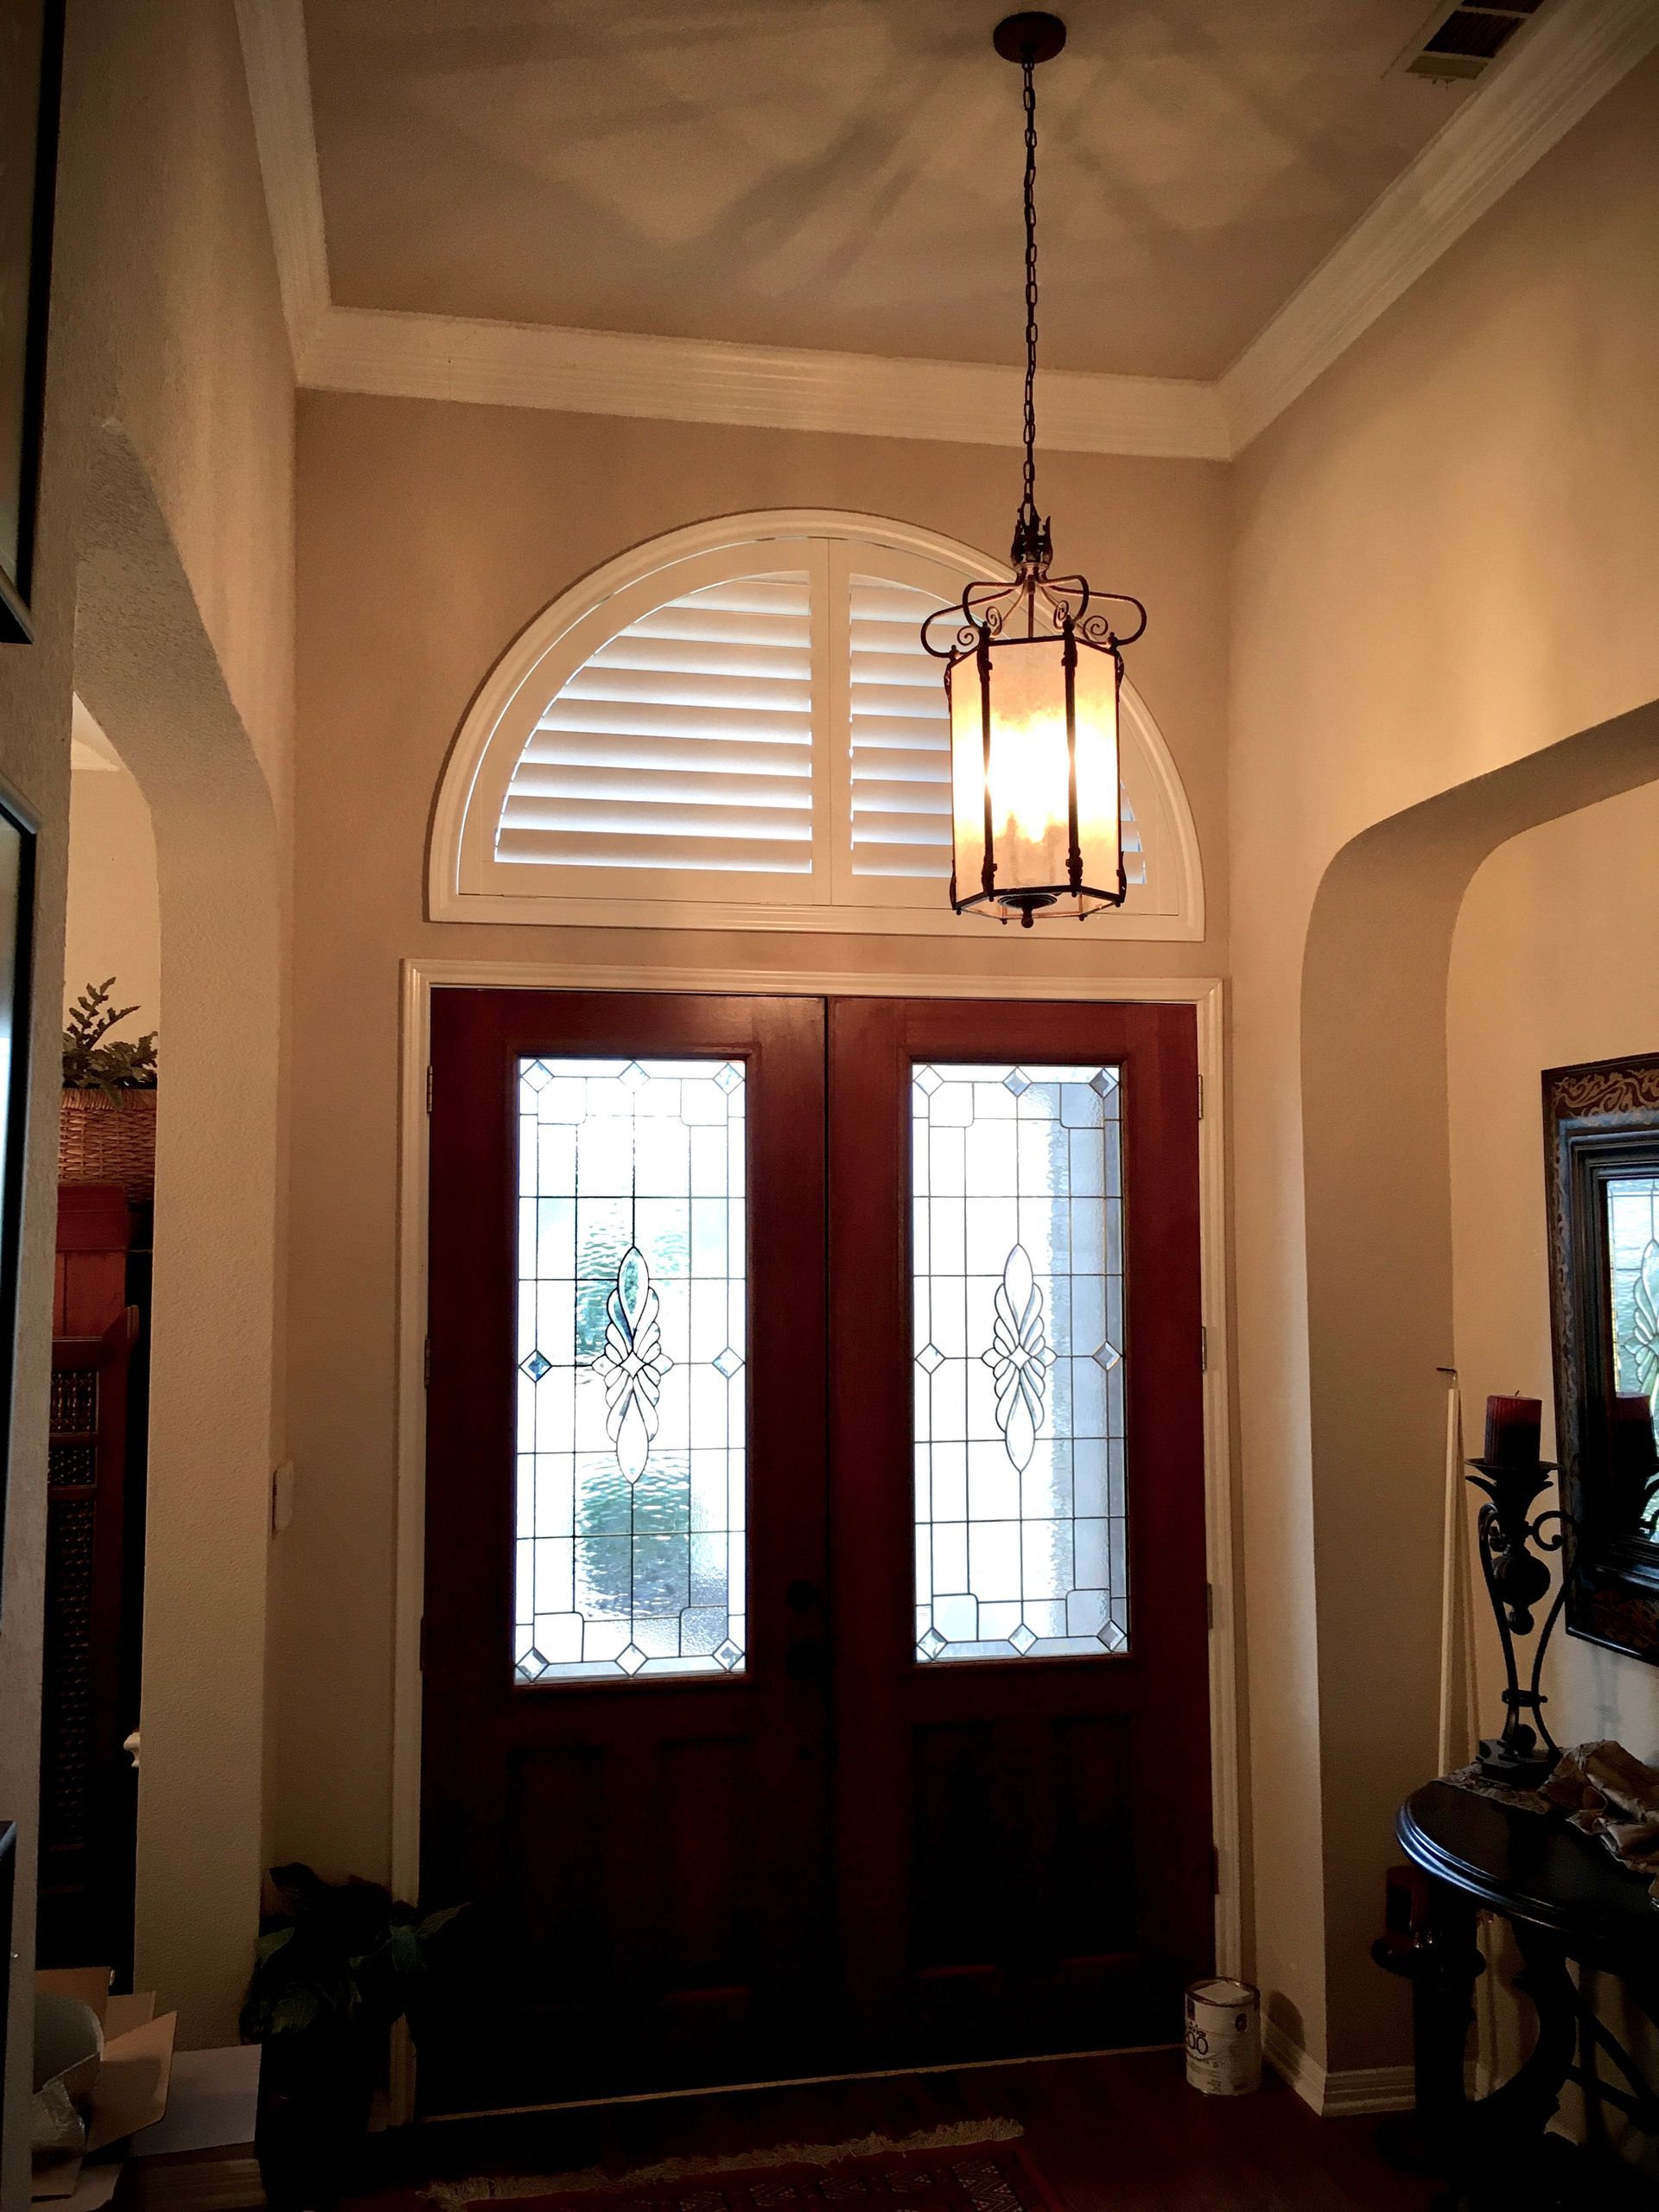 West lake hallway features arched plantation shutters over doors